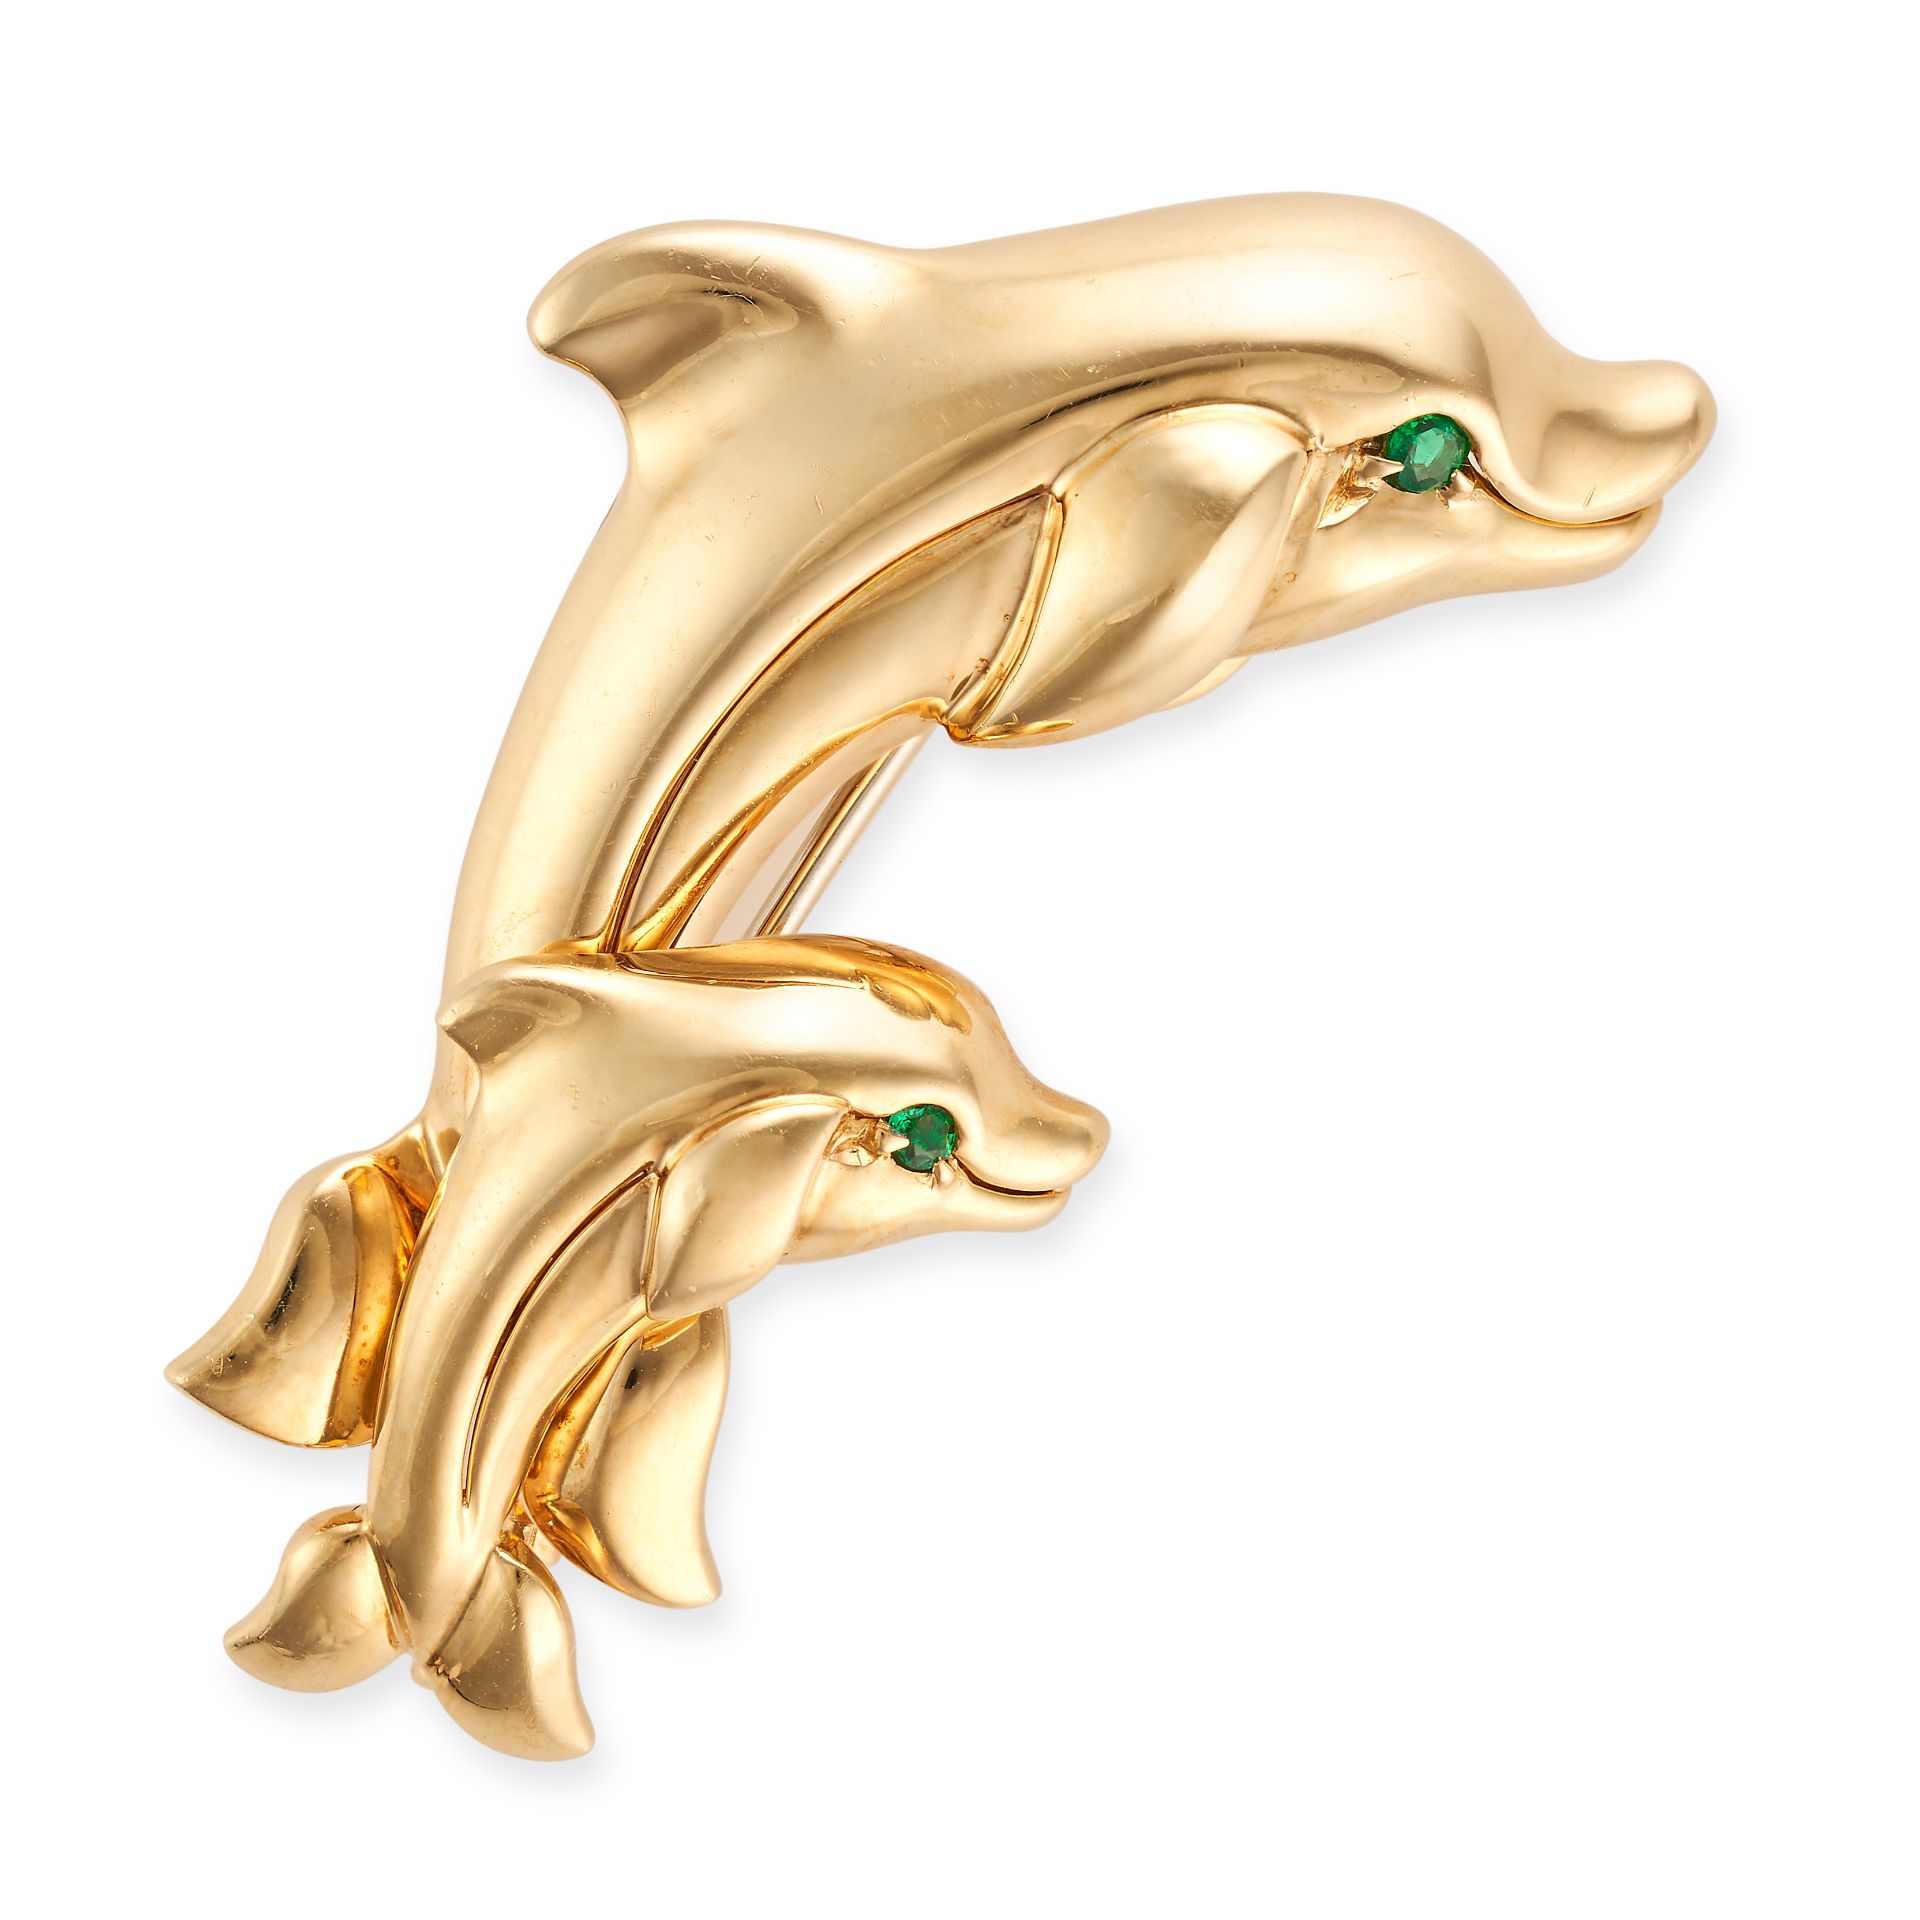 CARTIER, AN EMERALD DOLPHIN BROOCH in 18ct yellow gold, designed as a mother and baby dolphin swi...